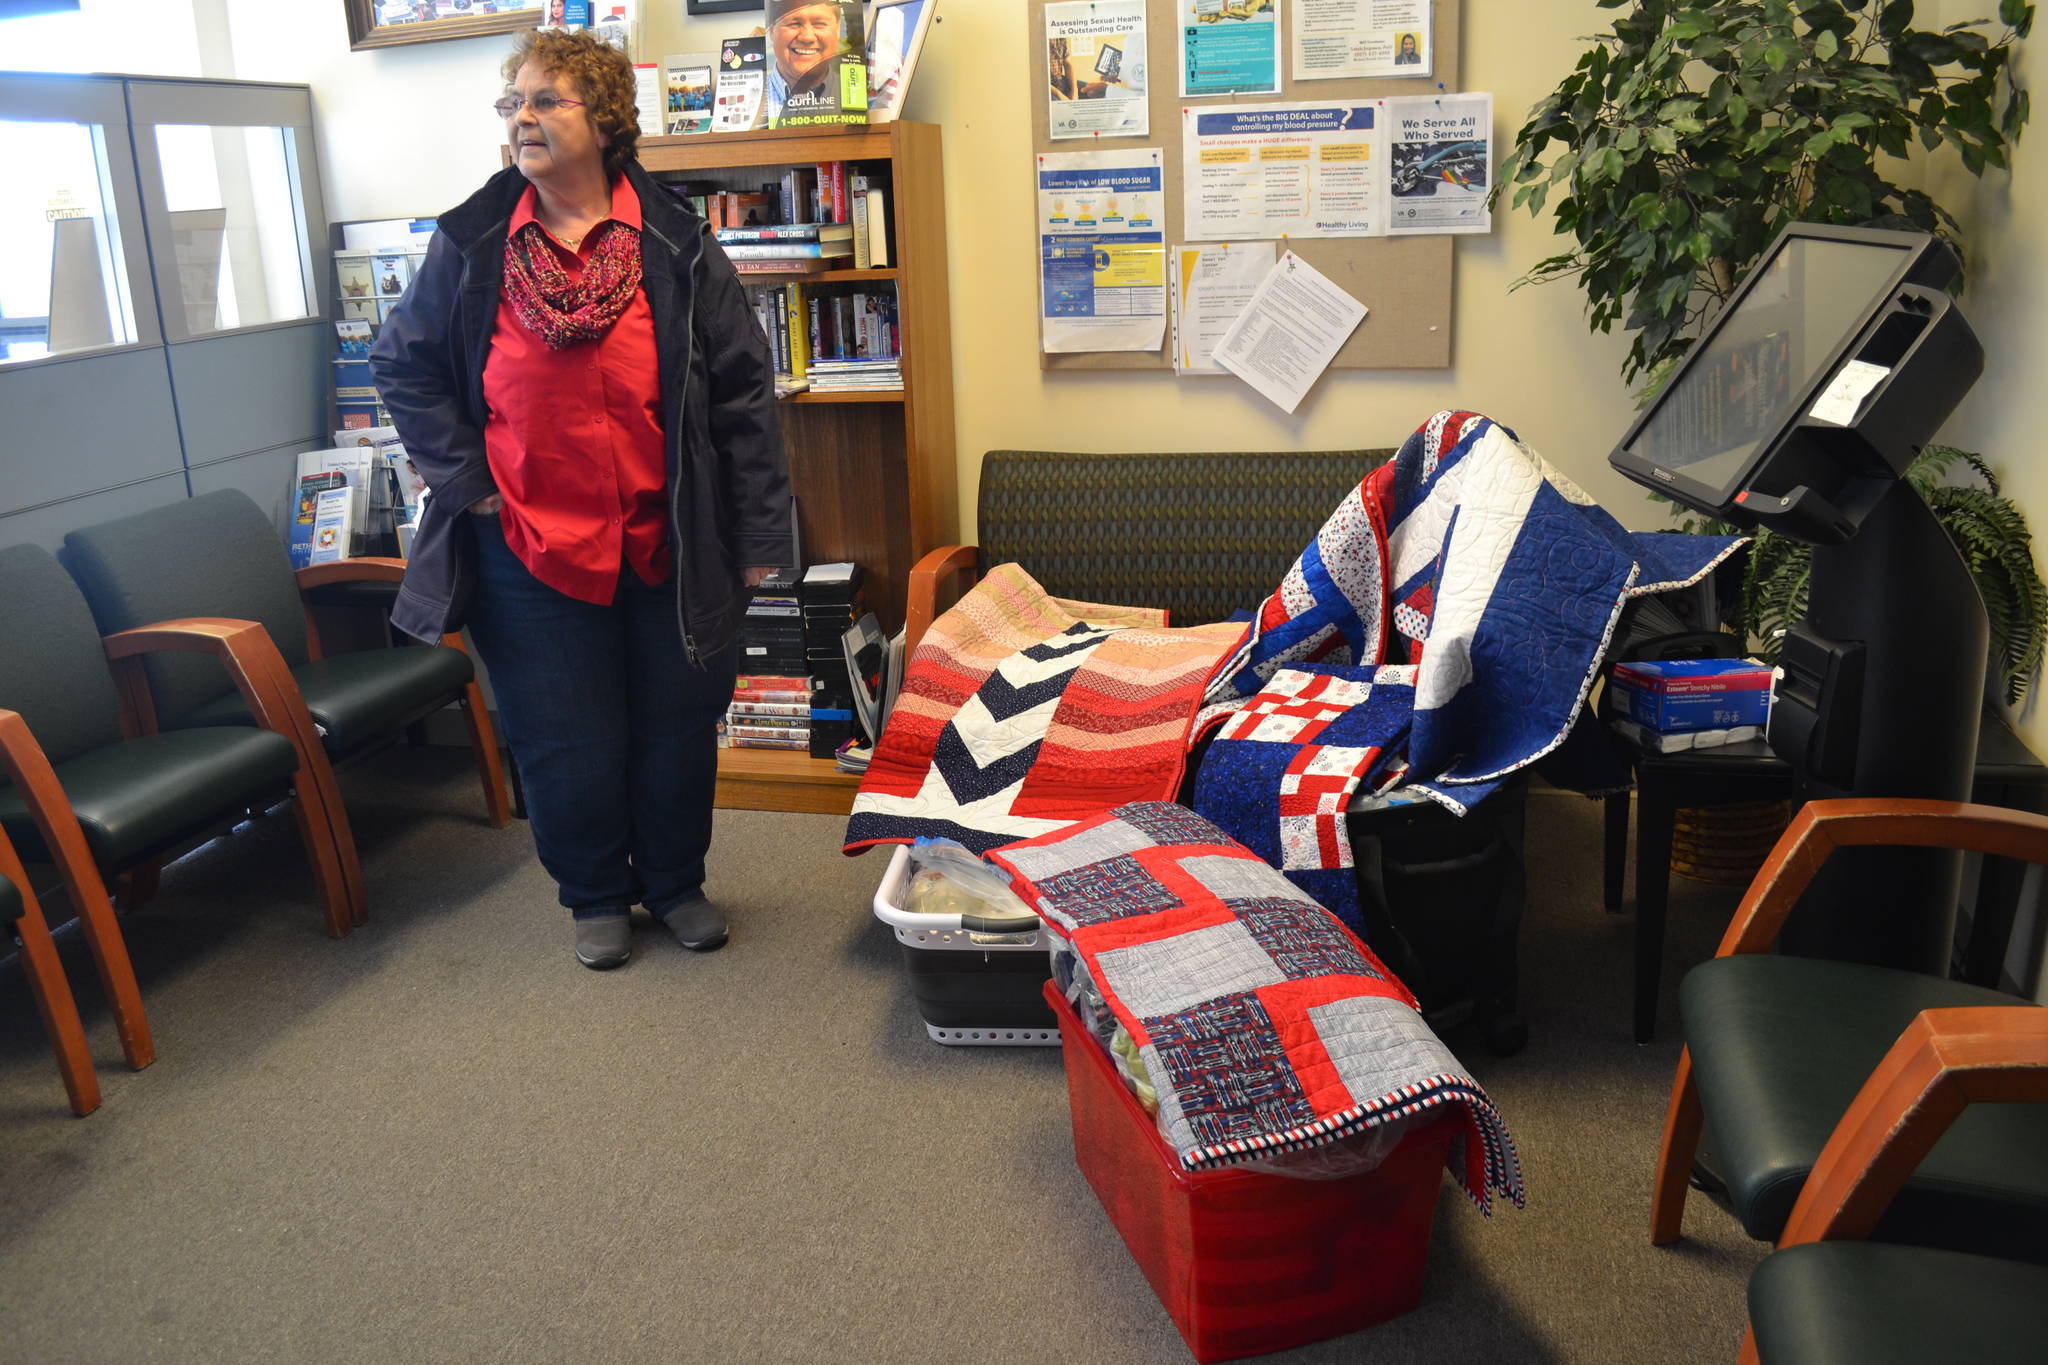 Kalie Klaysmat, President and co-founder of Quilts for Heroes, delivers over a dozen quilts to peninsula veterans undergoing chemotherapy on Thursday, Feb. 21, 2019, in Kenai, Alaska. (Photo by Victoria Petersen/Peninsula Clarion)